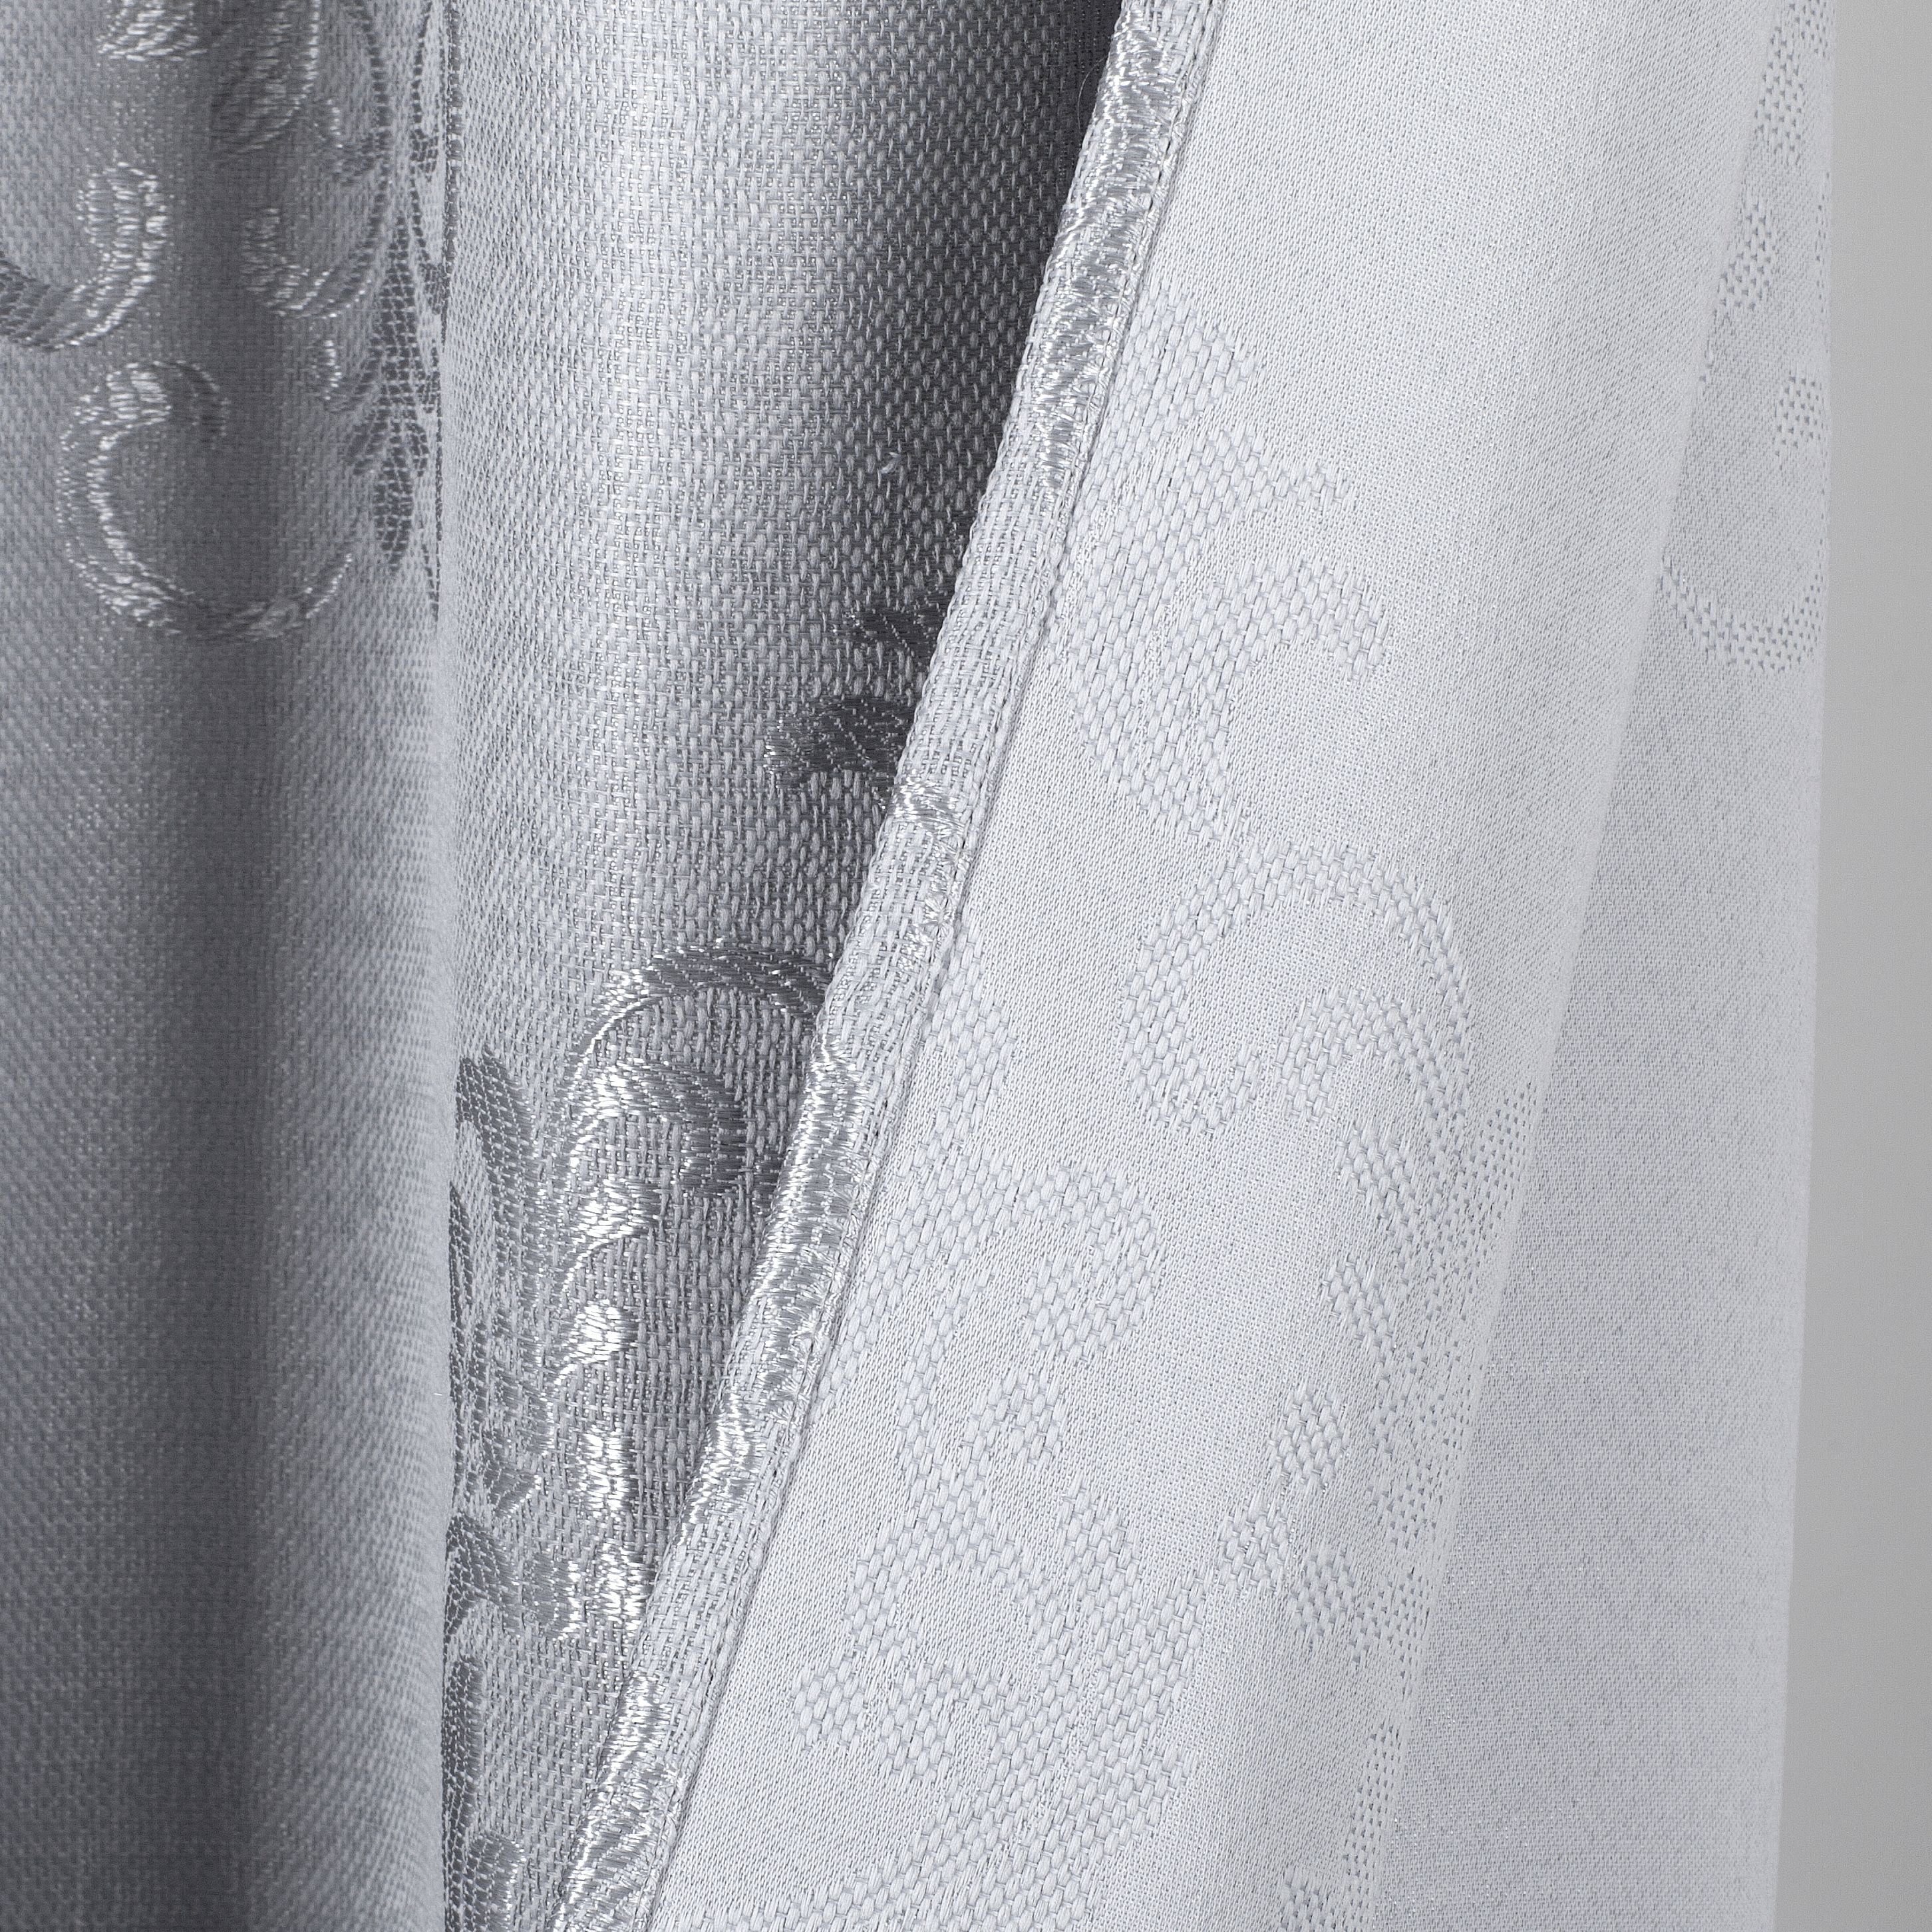 Dainty Home Majestic Satin Embroidered Damask Textured Weaved Cotton Feel Designed Fabric Shower Curtain